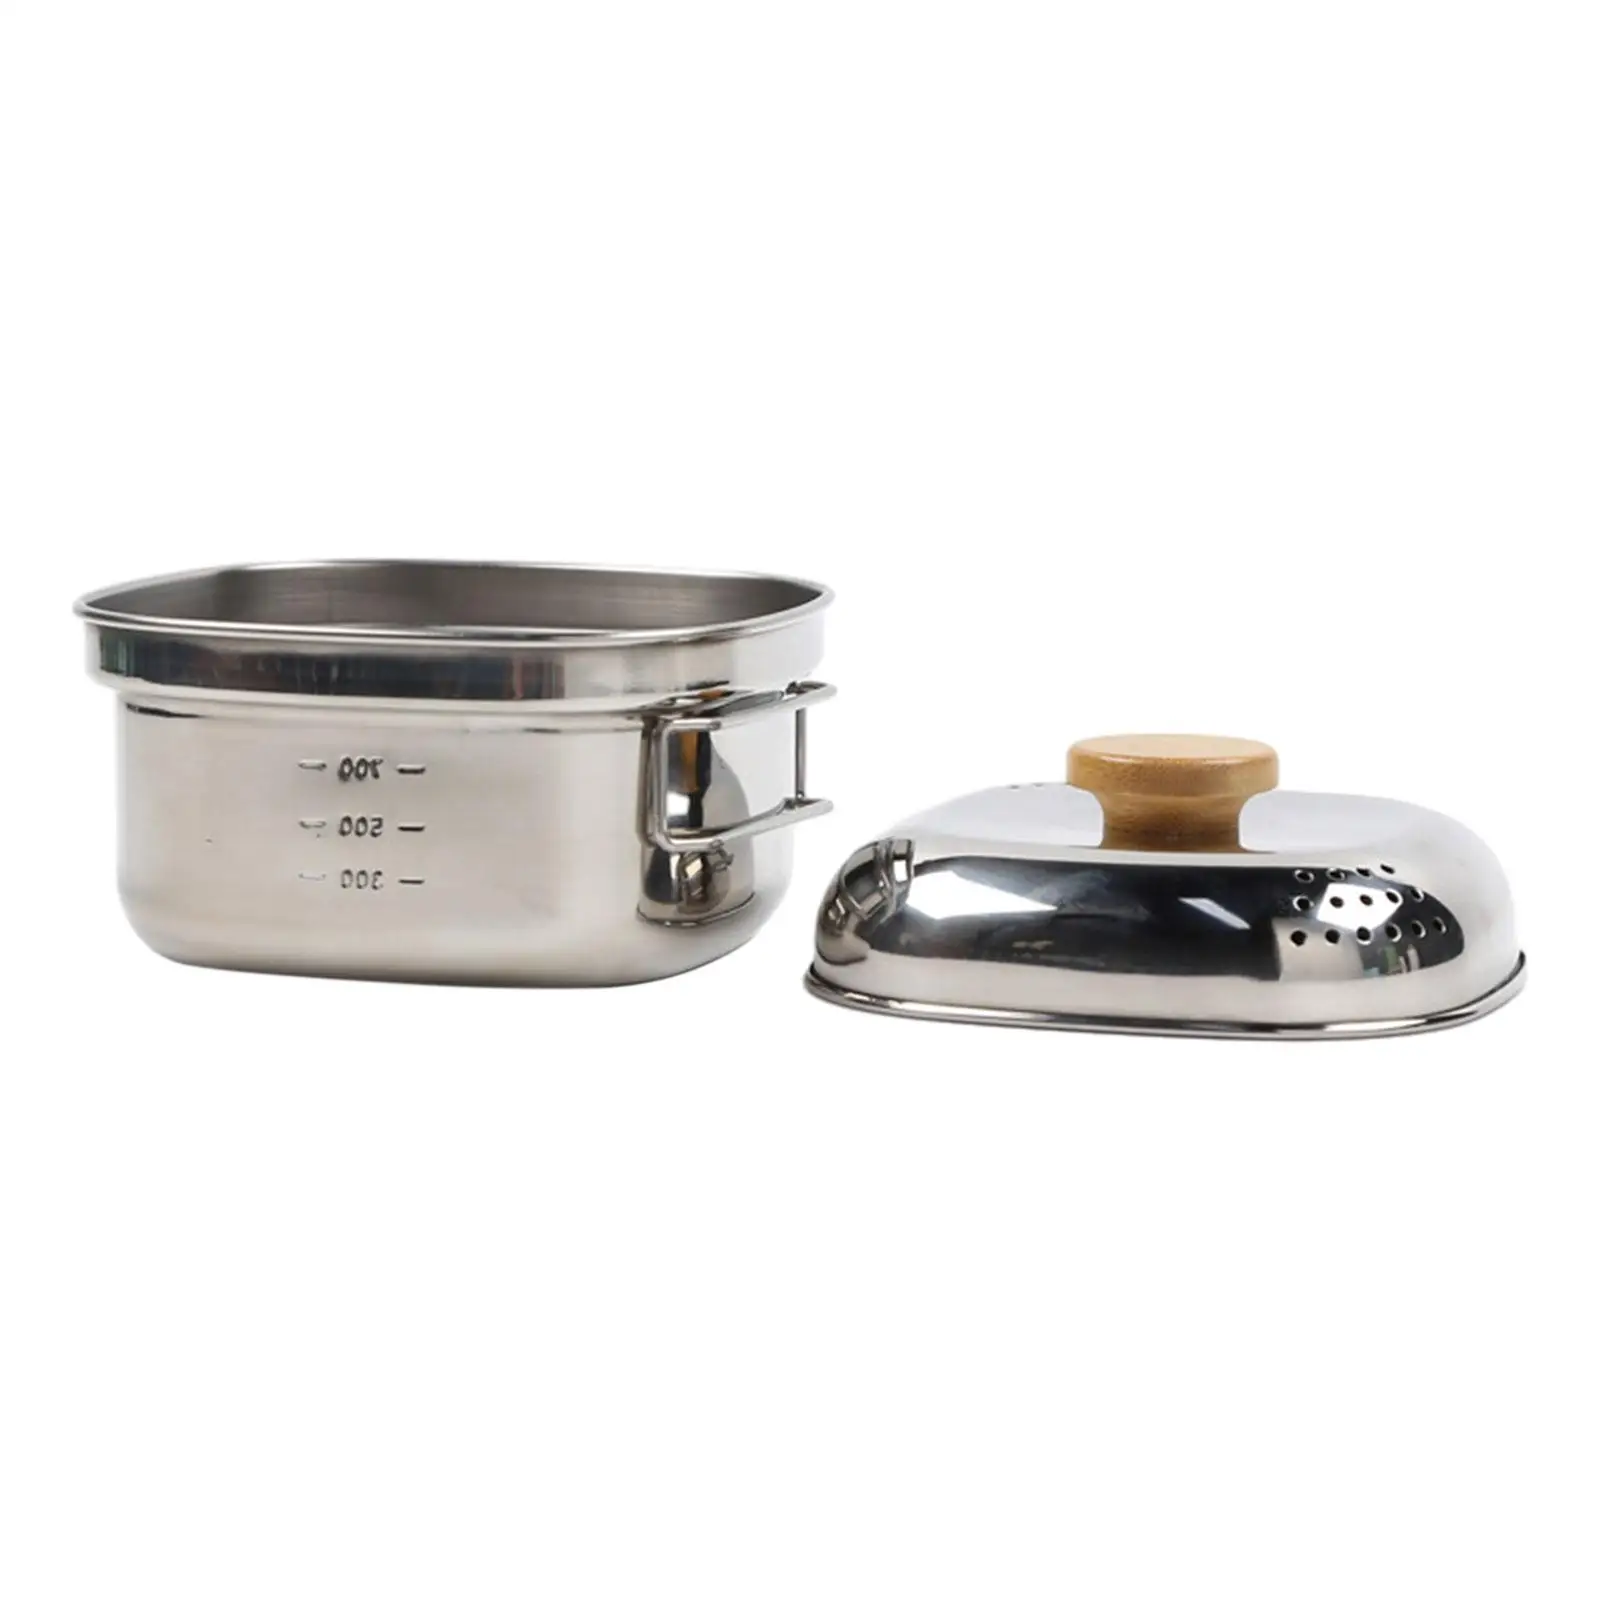 Camping Cook Pot Stainless Steel with Foldable Handle and Lid Small Cooking Pot for Traveling Picnic Home Outdoor Backpacking